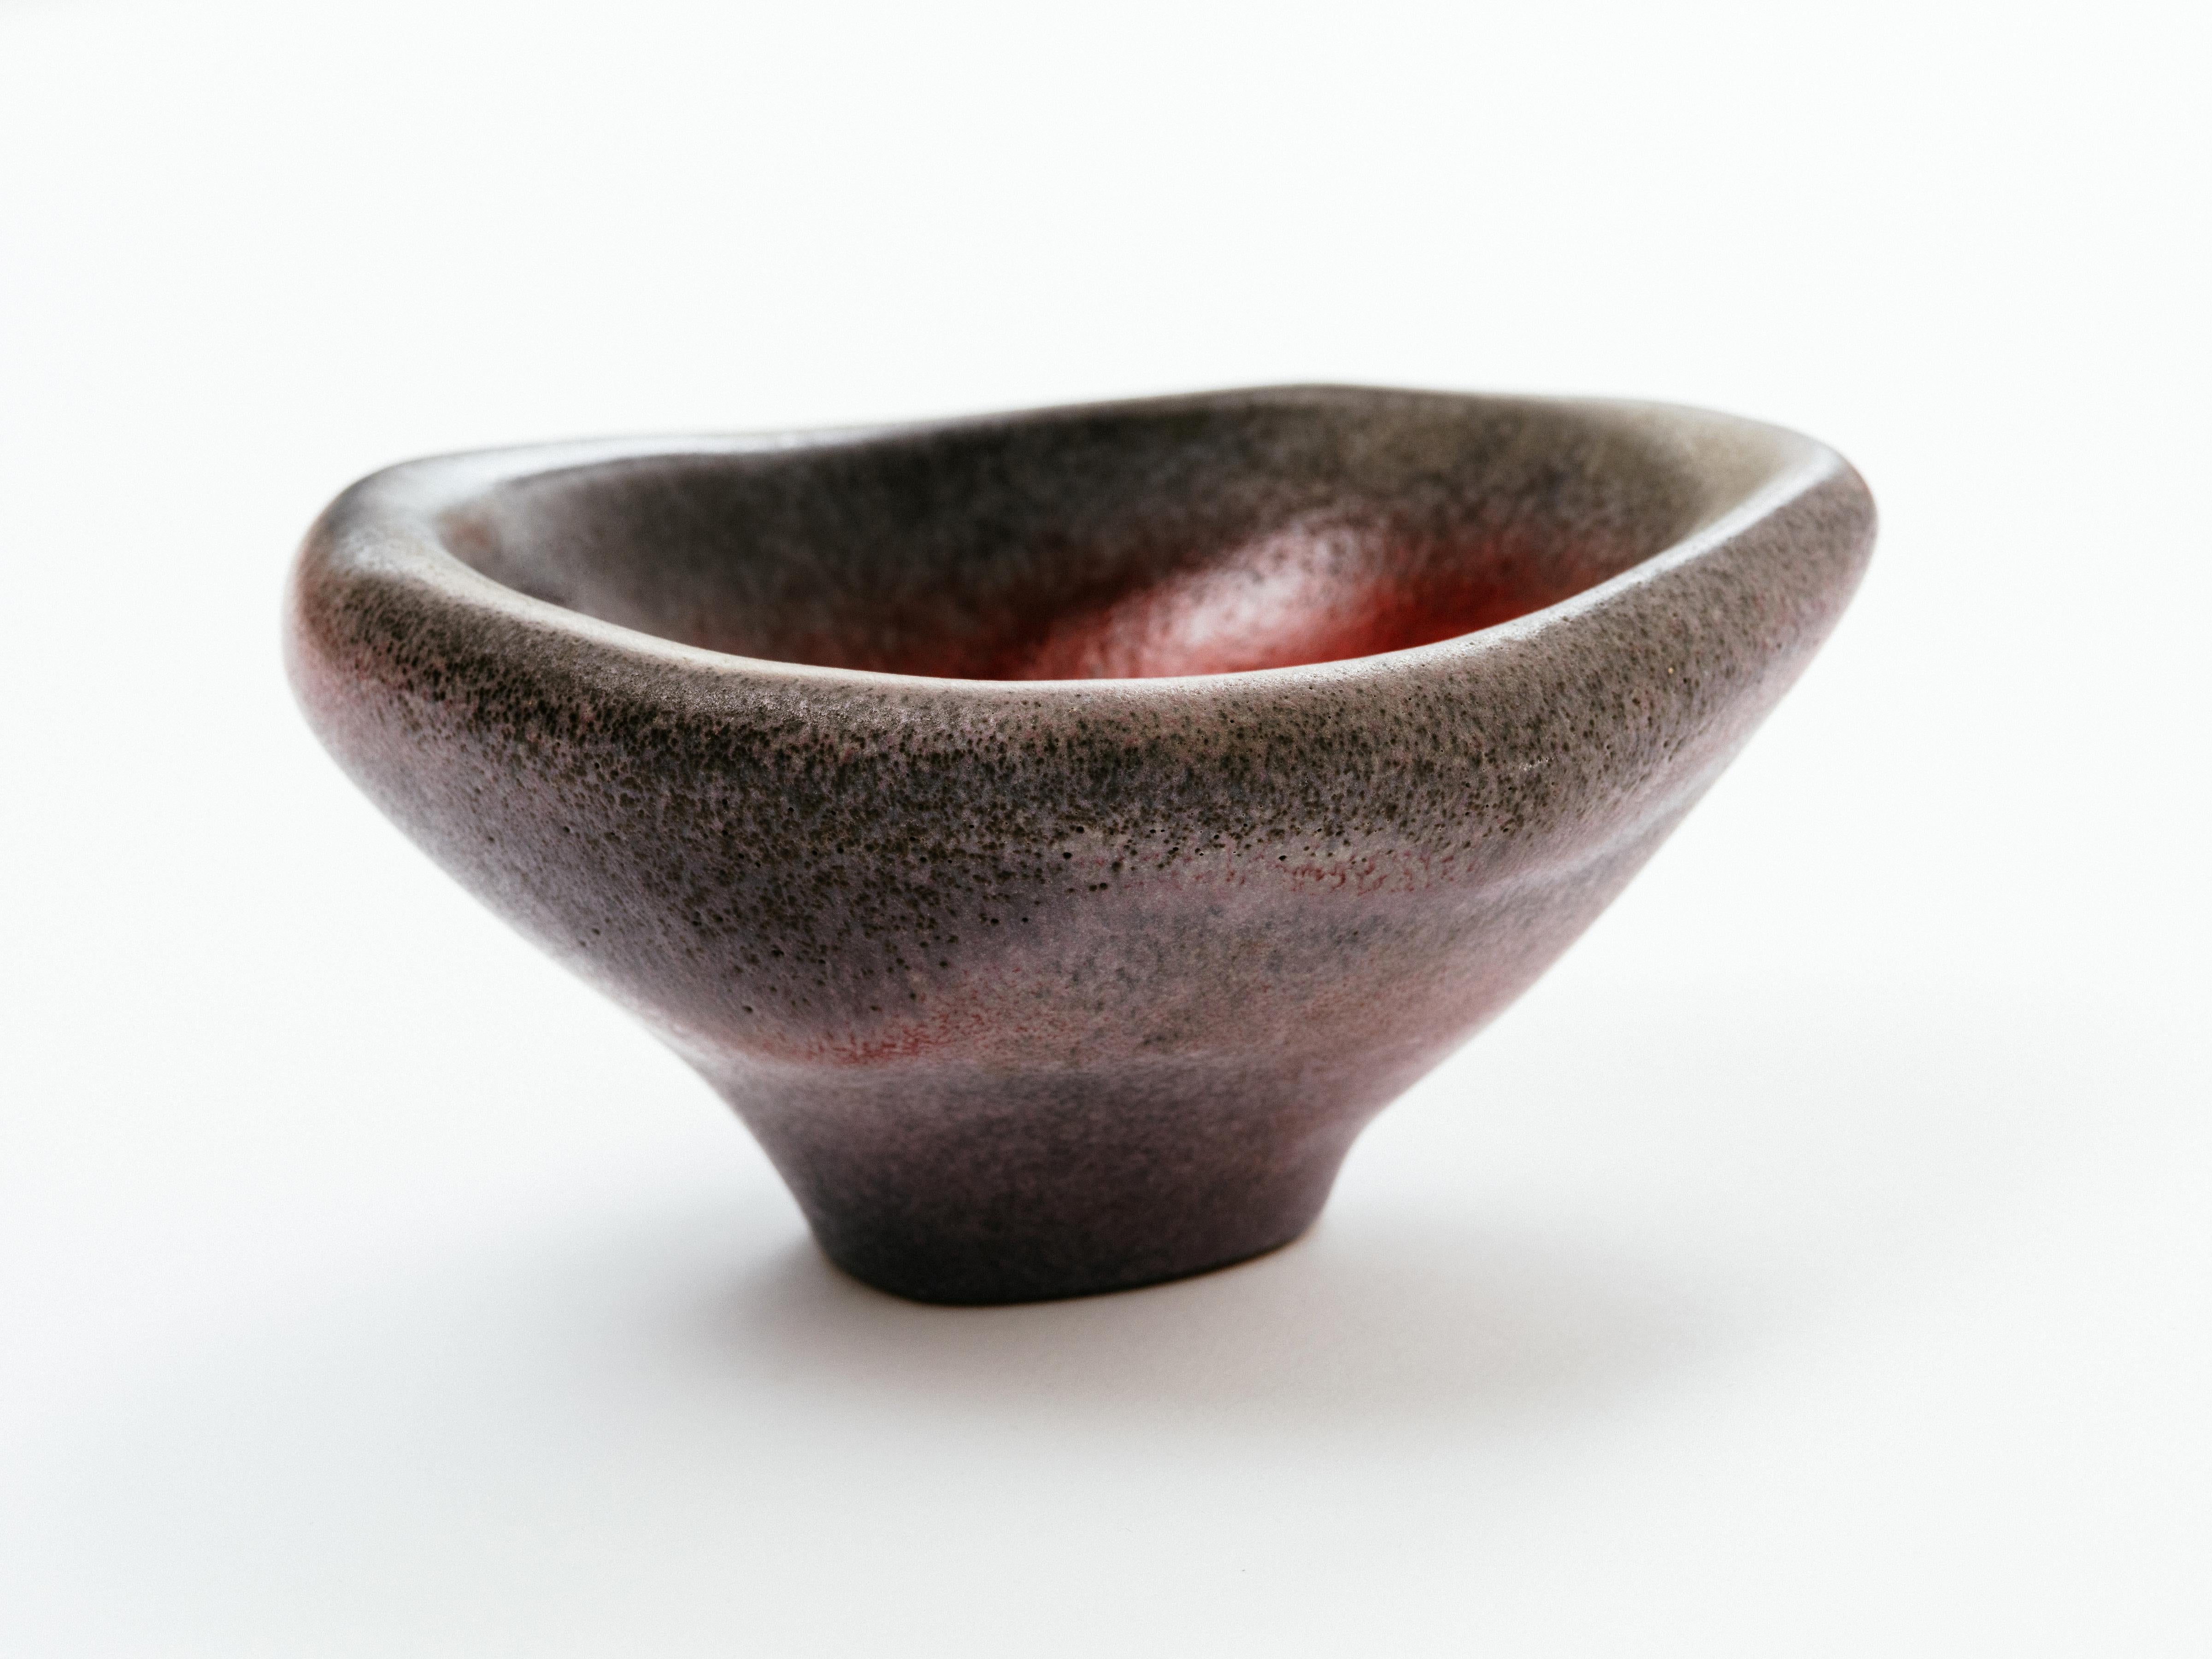 A striking and highly unusual slip cast ceramic vessel in a rather complex matte, gray glaze that nearly resembles stone, finished with an intense glossy red glaze to the interior. Czech, 1960s.